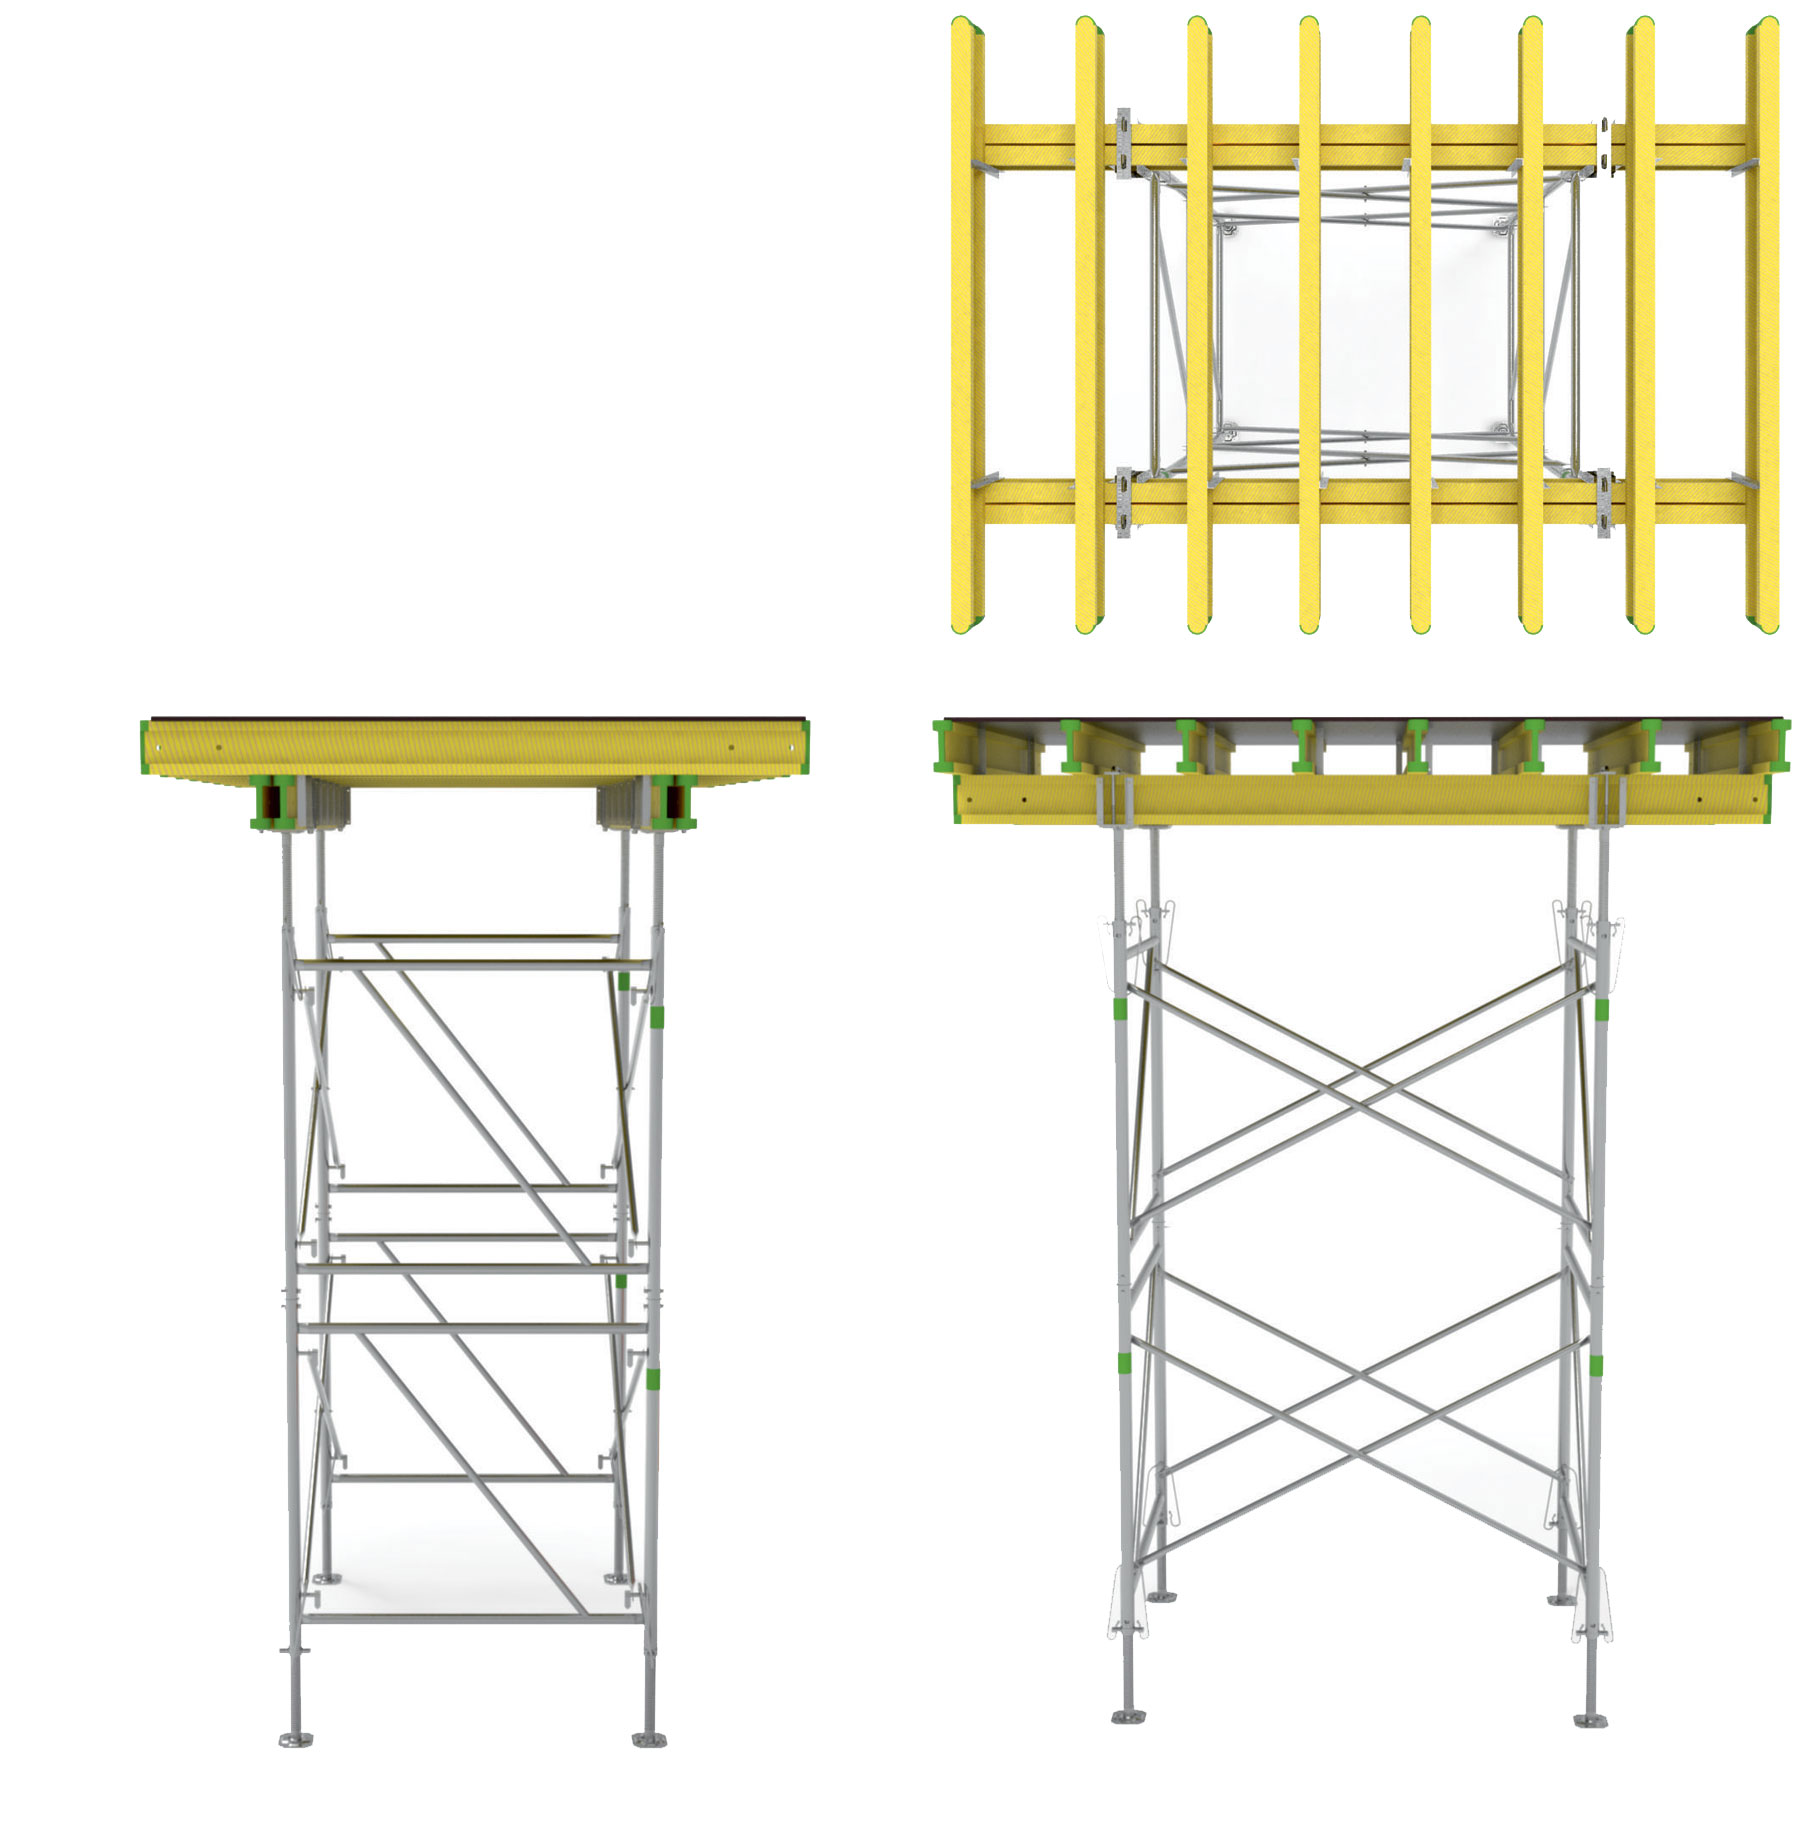 GBM STH Shoring tower